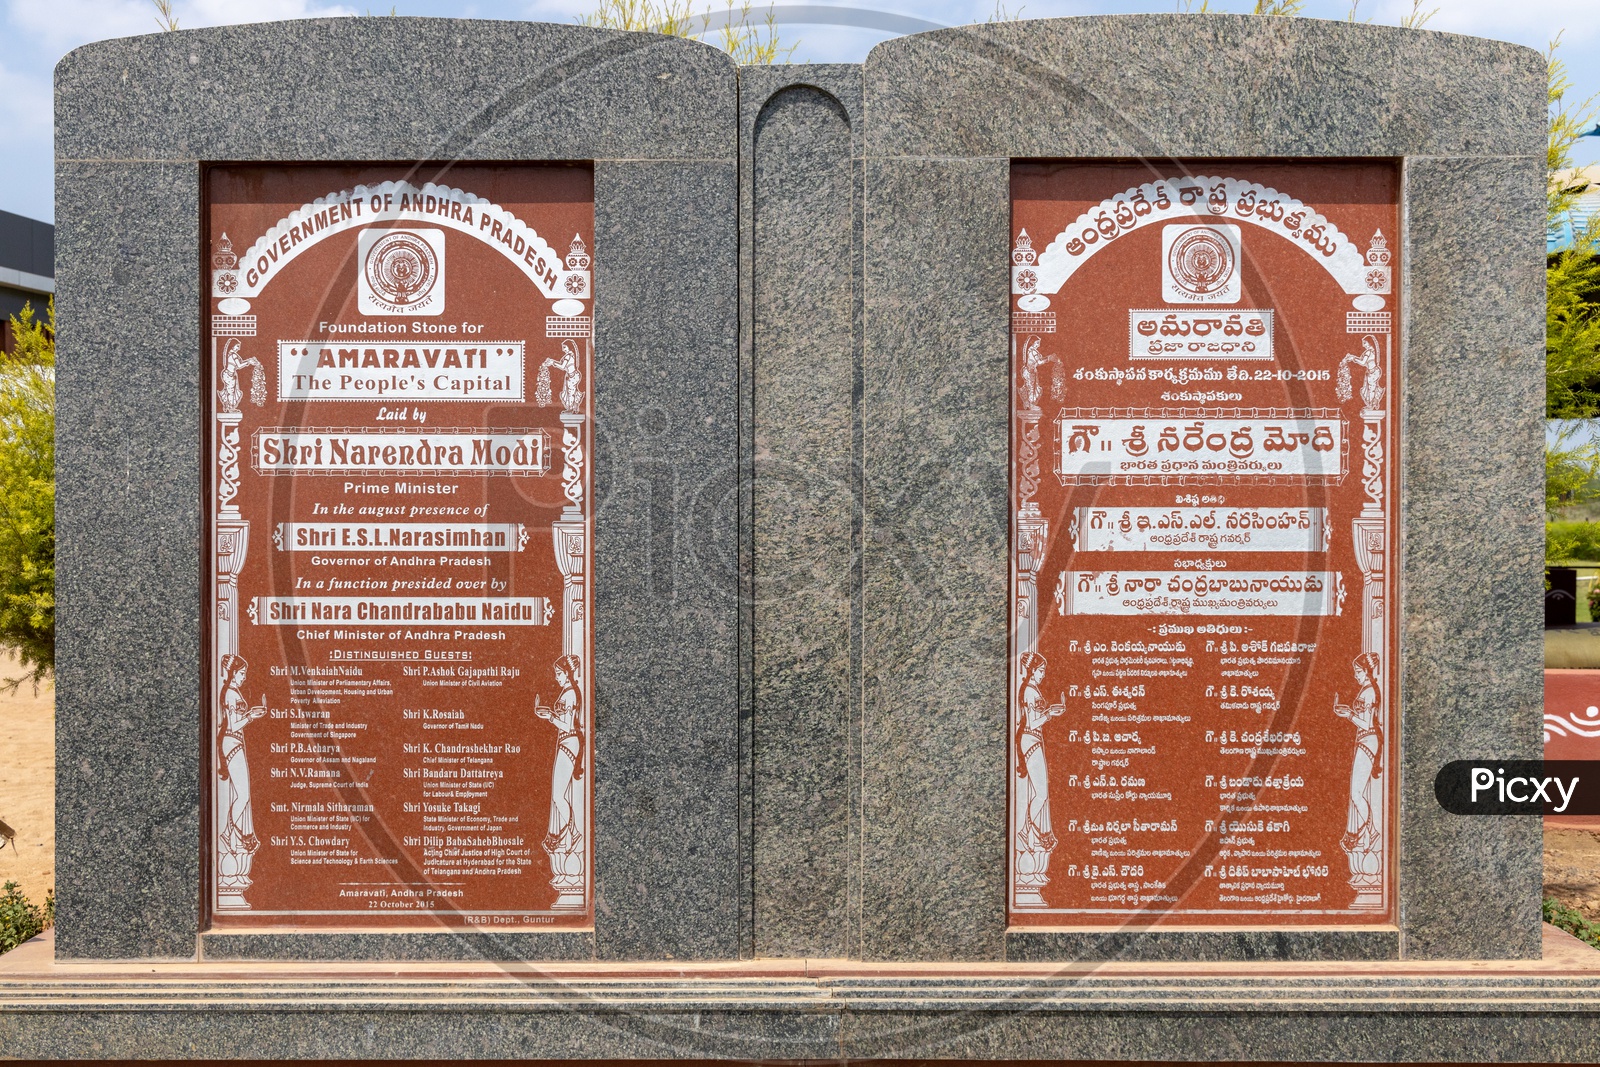 Foundation stone with names engraved